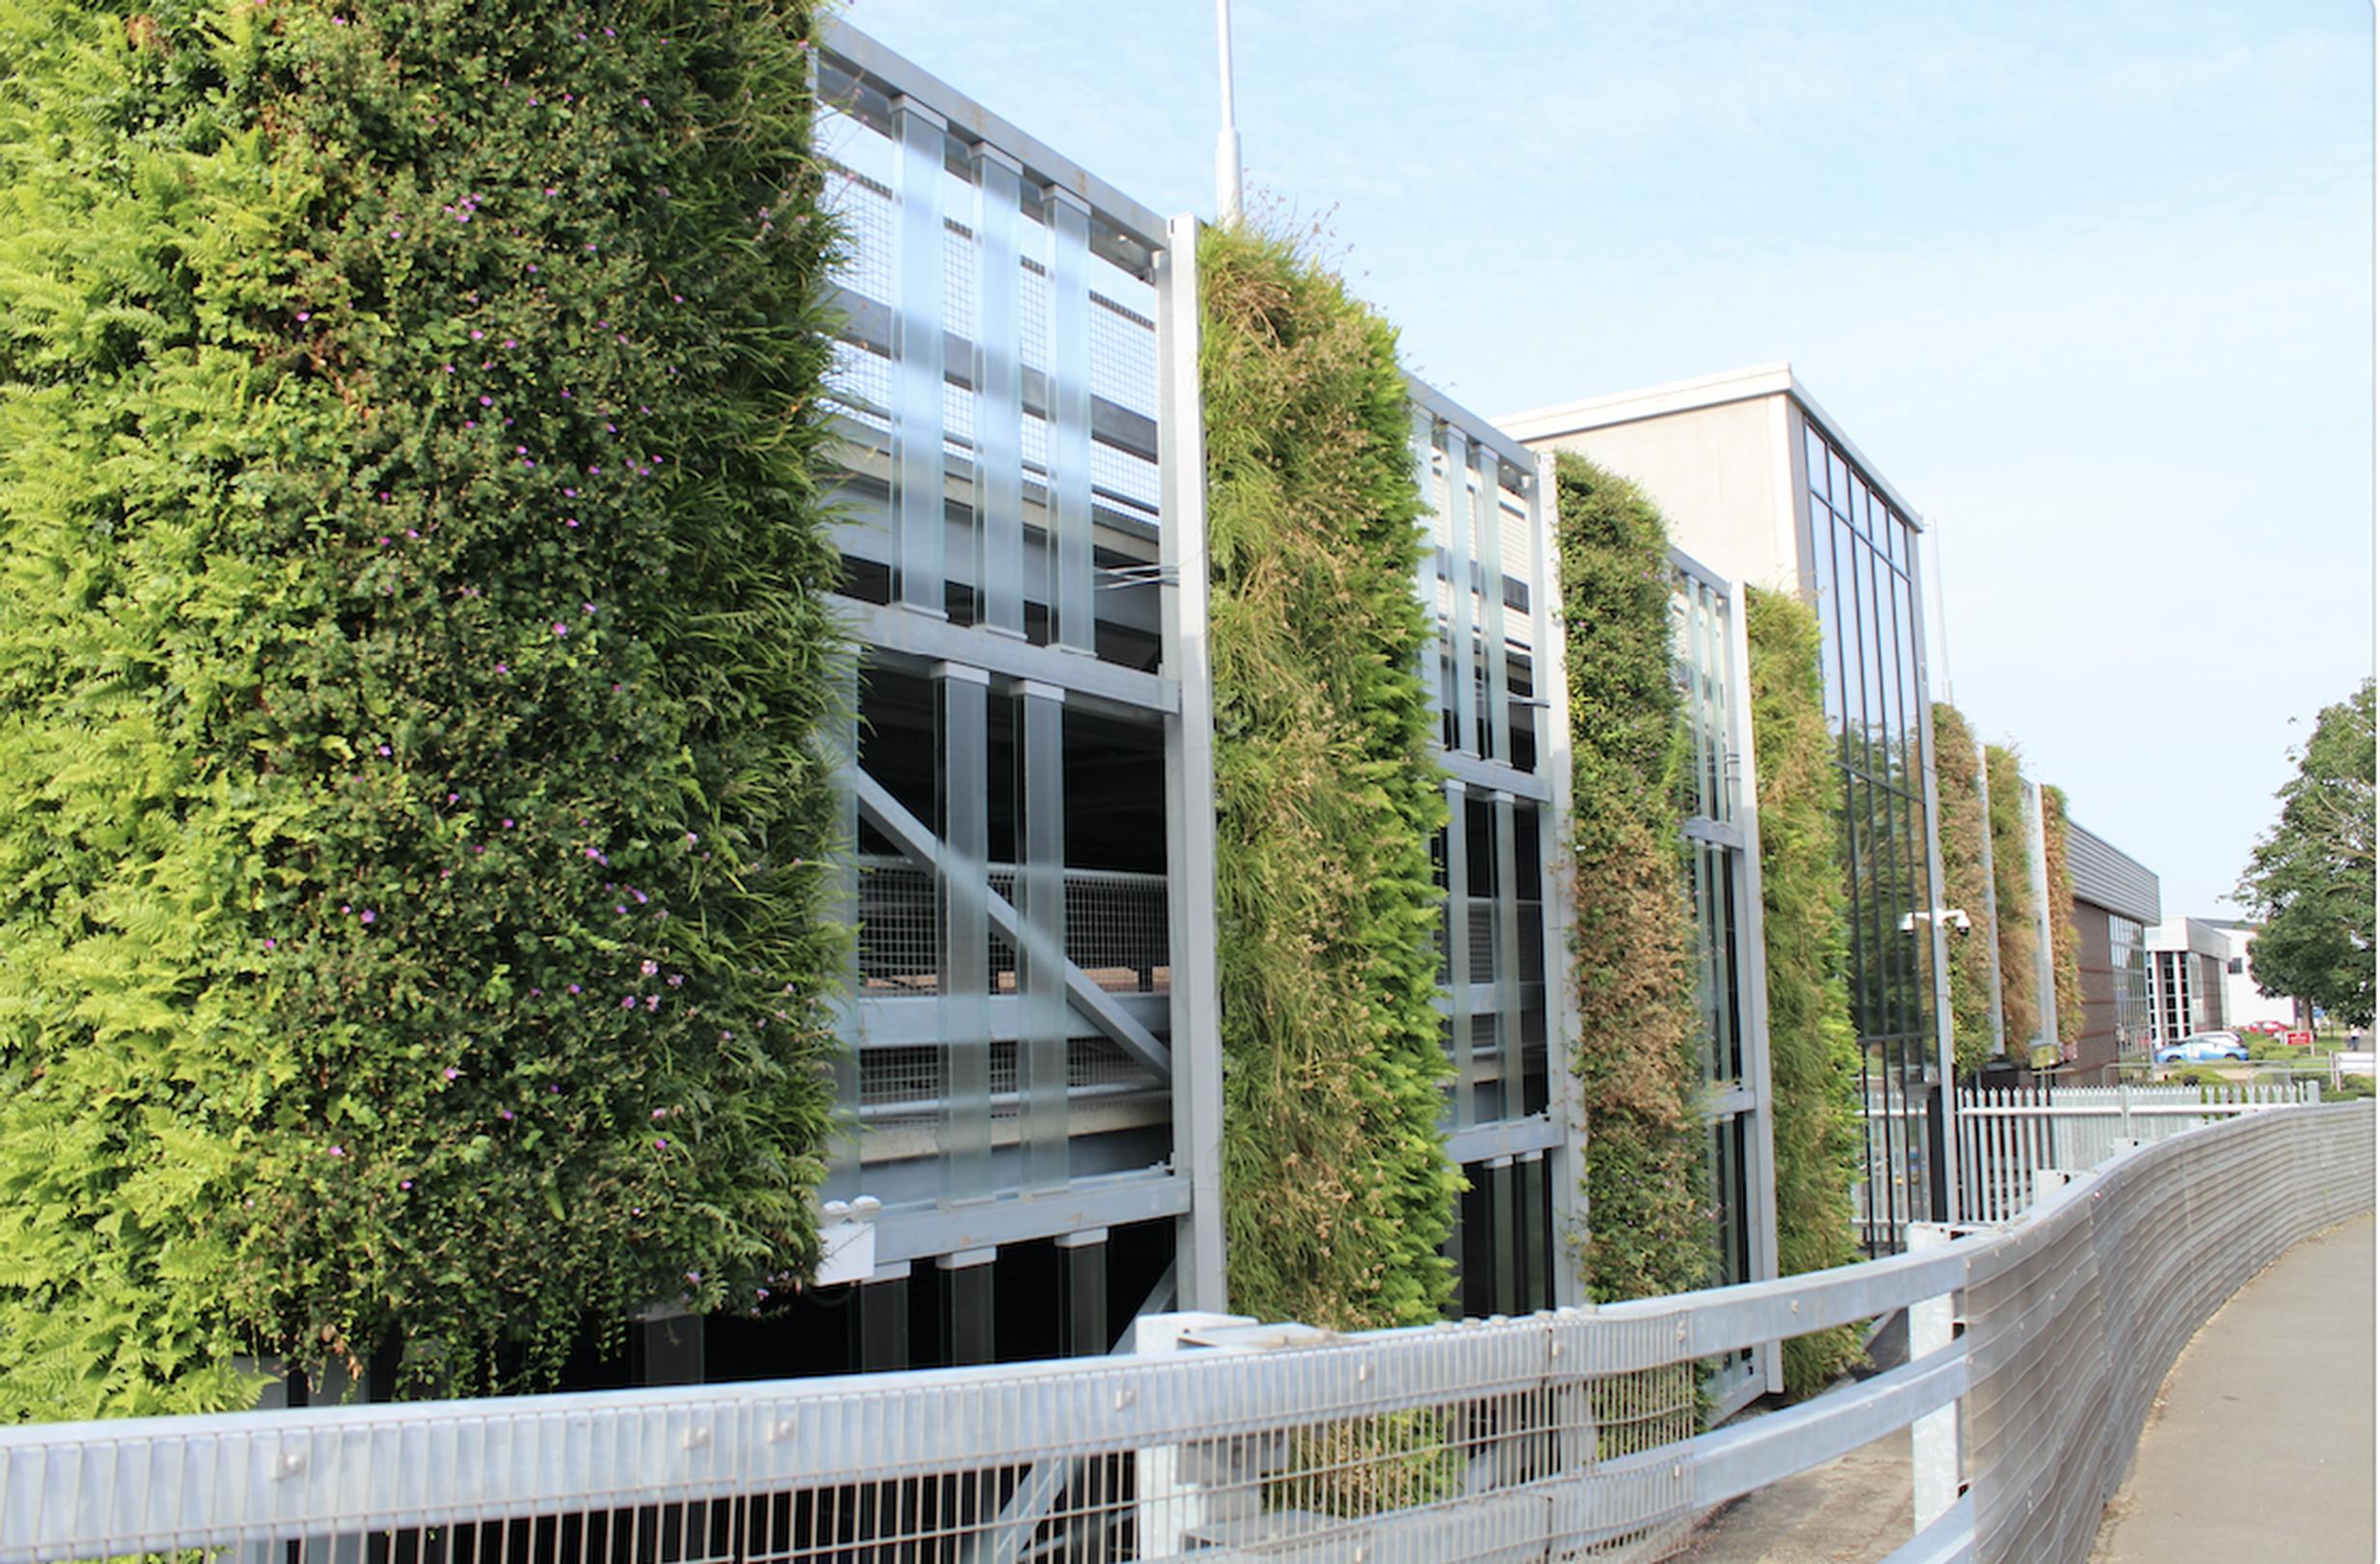 The 222-space MSCP at Bedford Avenue in Slough has a sustainable, low maintenance living wall façade